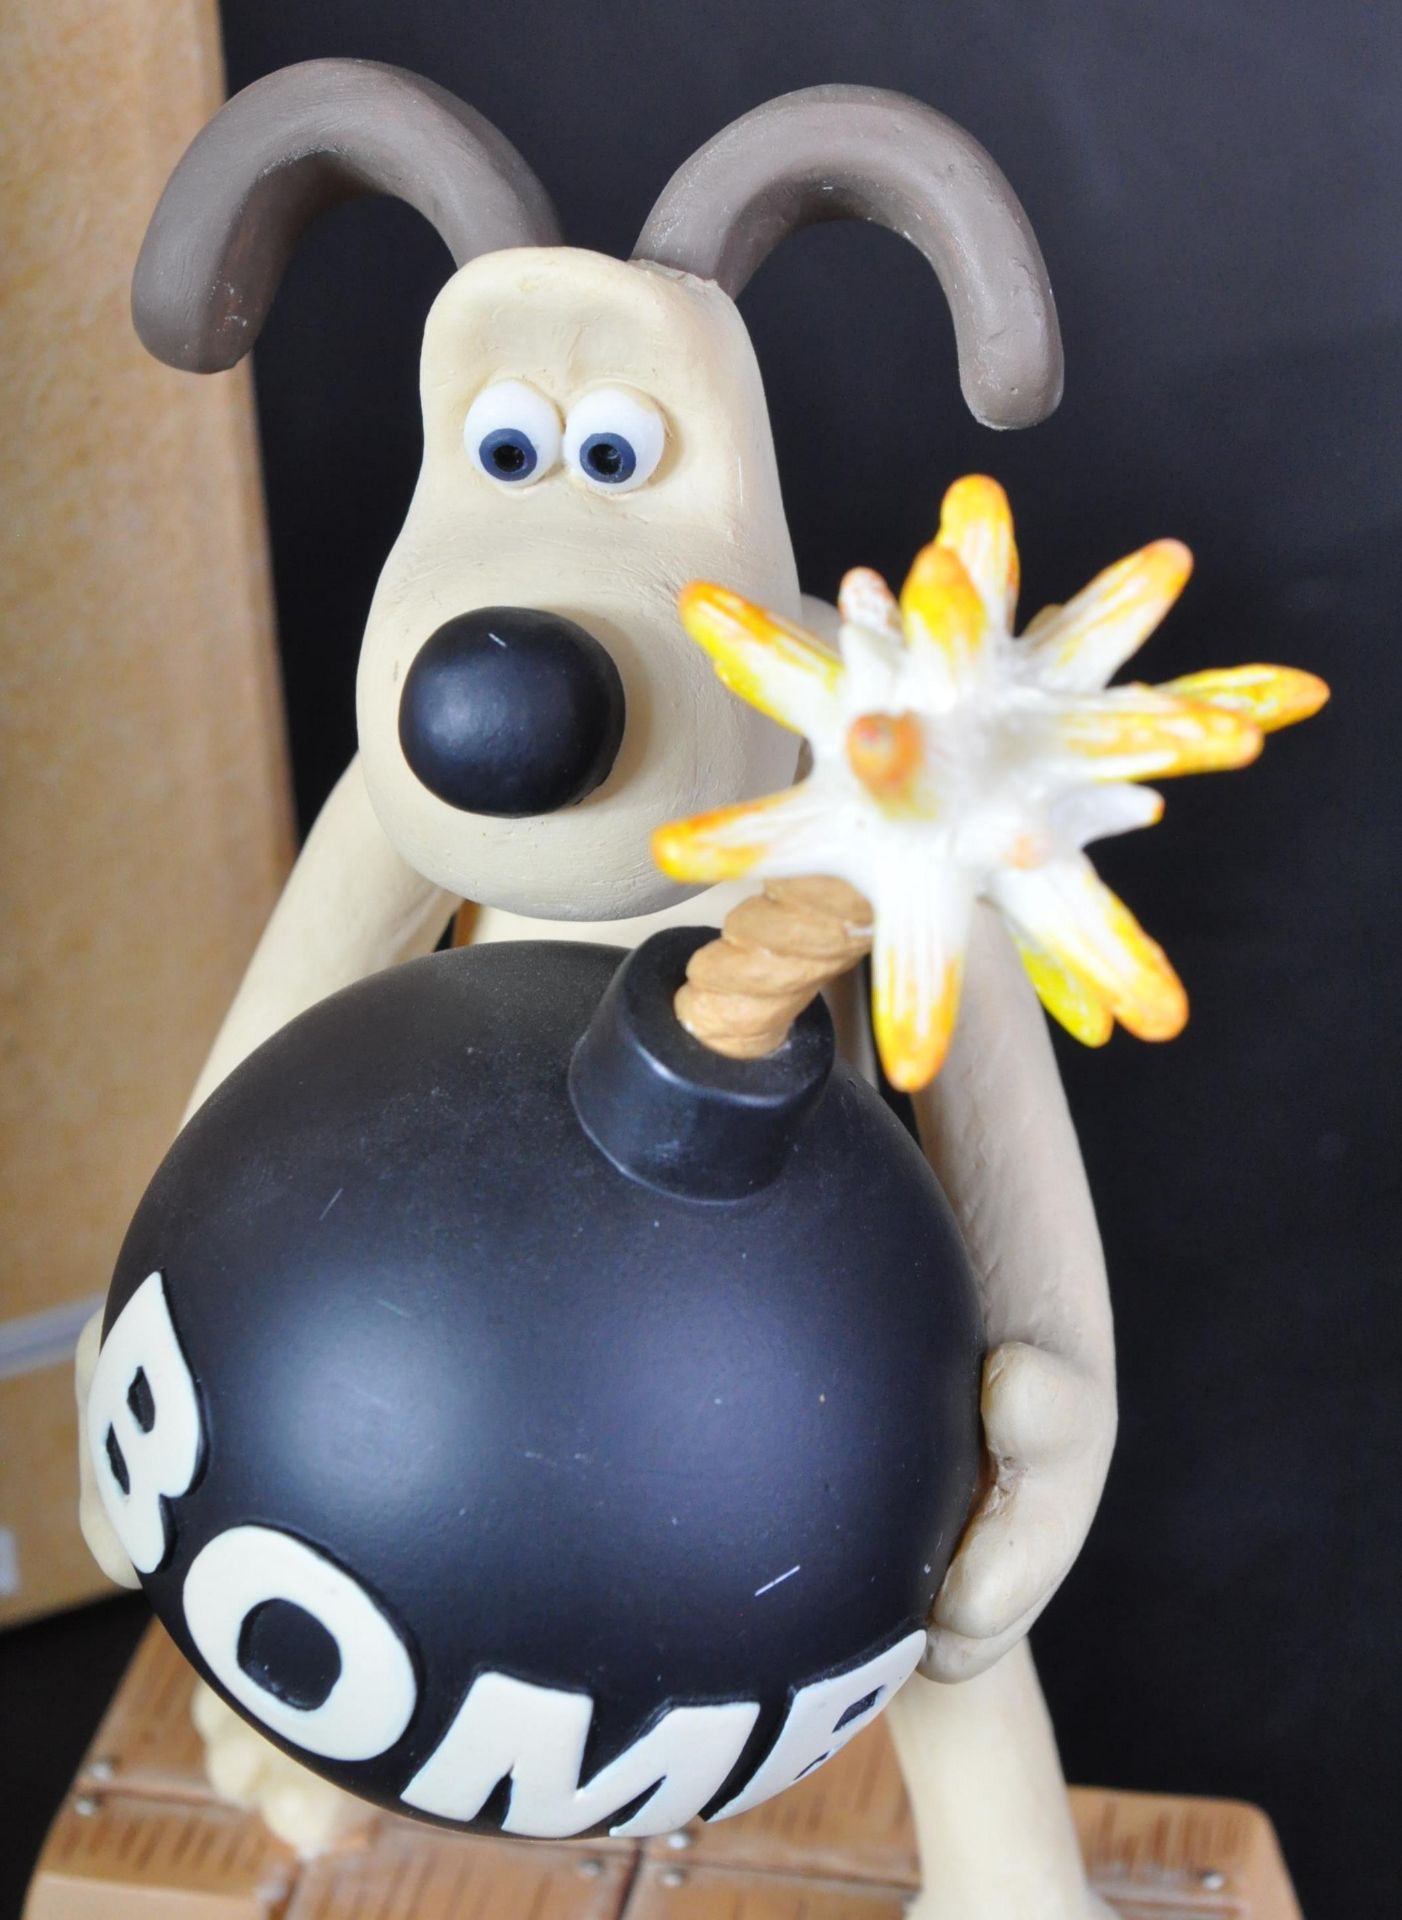 WALLACE & GROMIT - ROBERT HARROP - LIMITED EDITION FIGURINE - Image 3 of 6